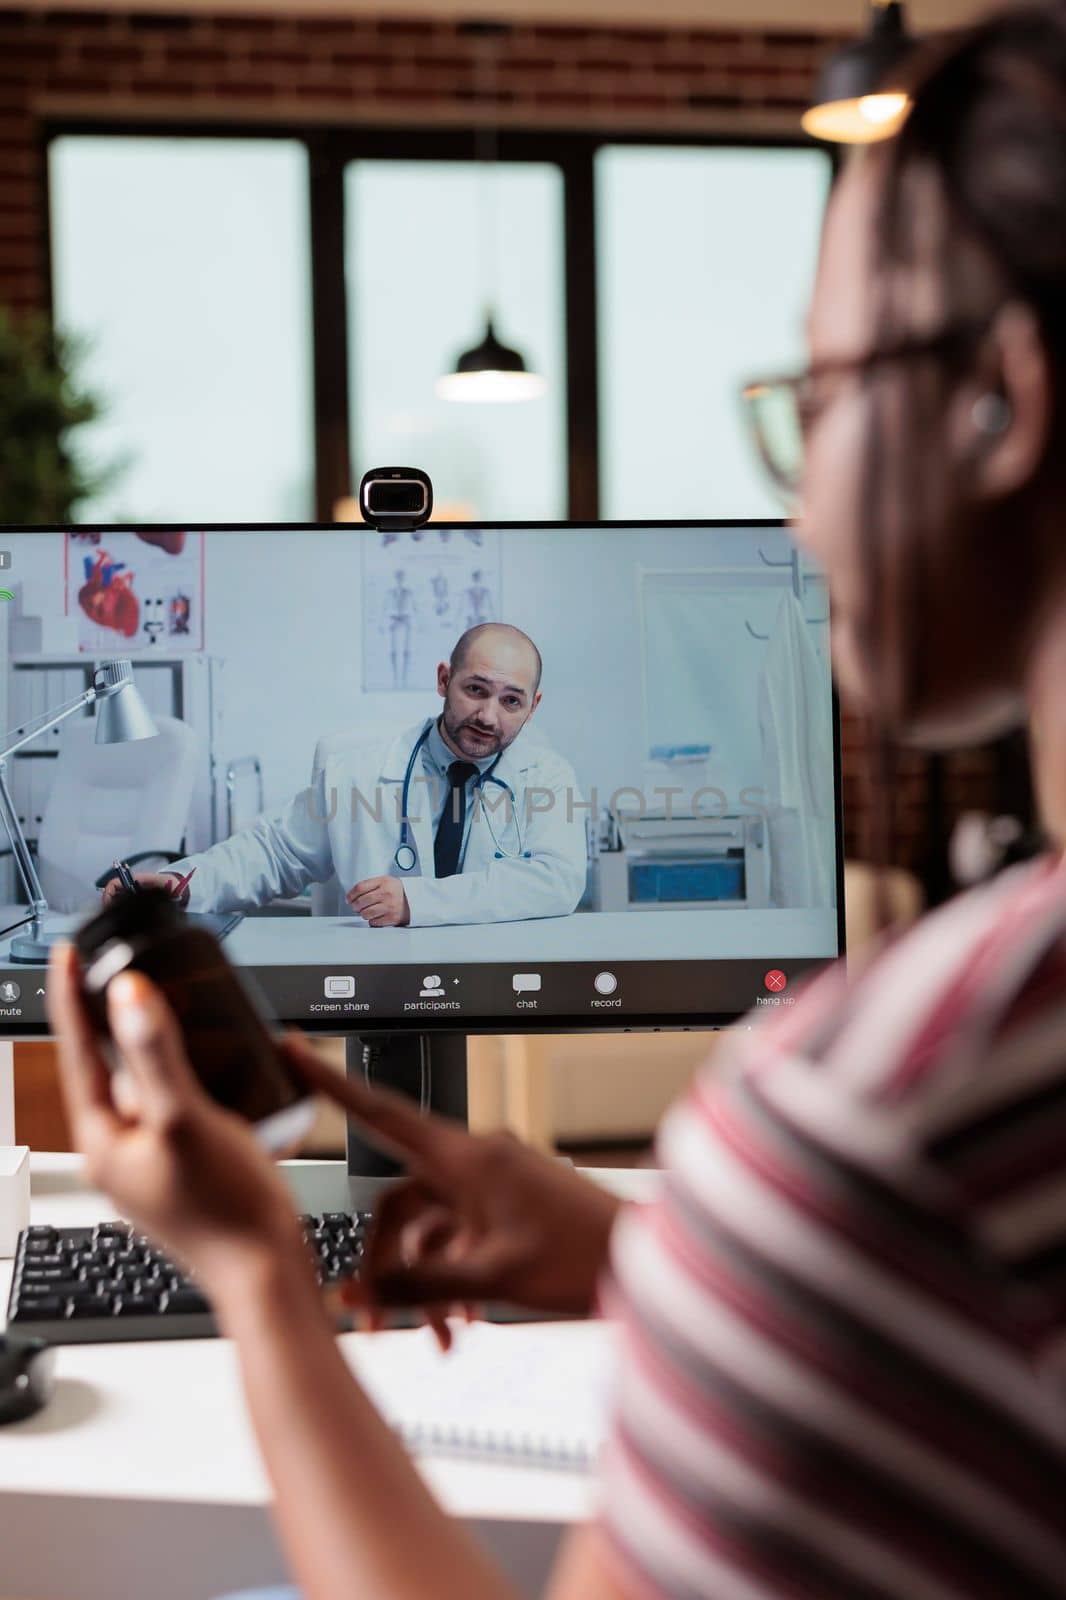 Patient discussing prescripted pills with doctor on video call by DCStudio